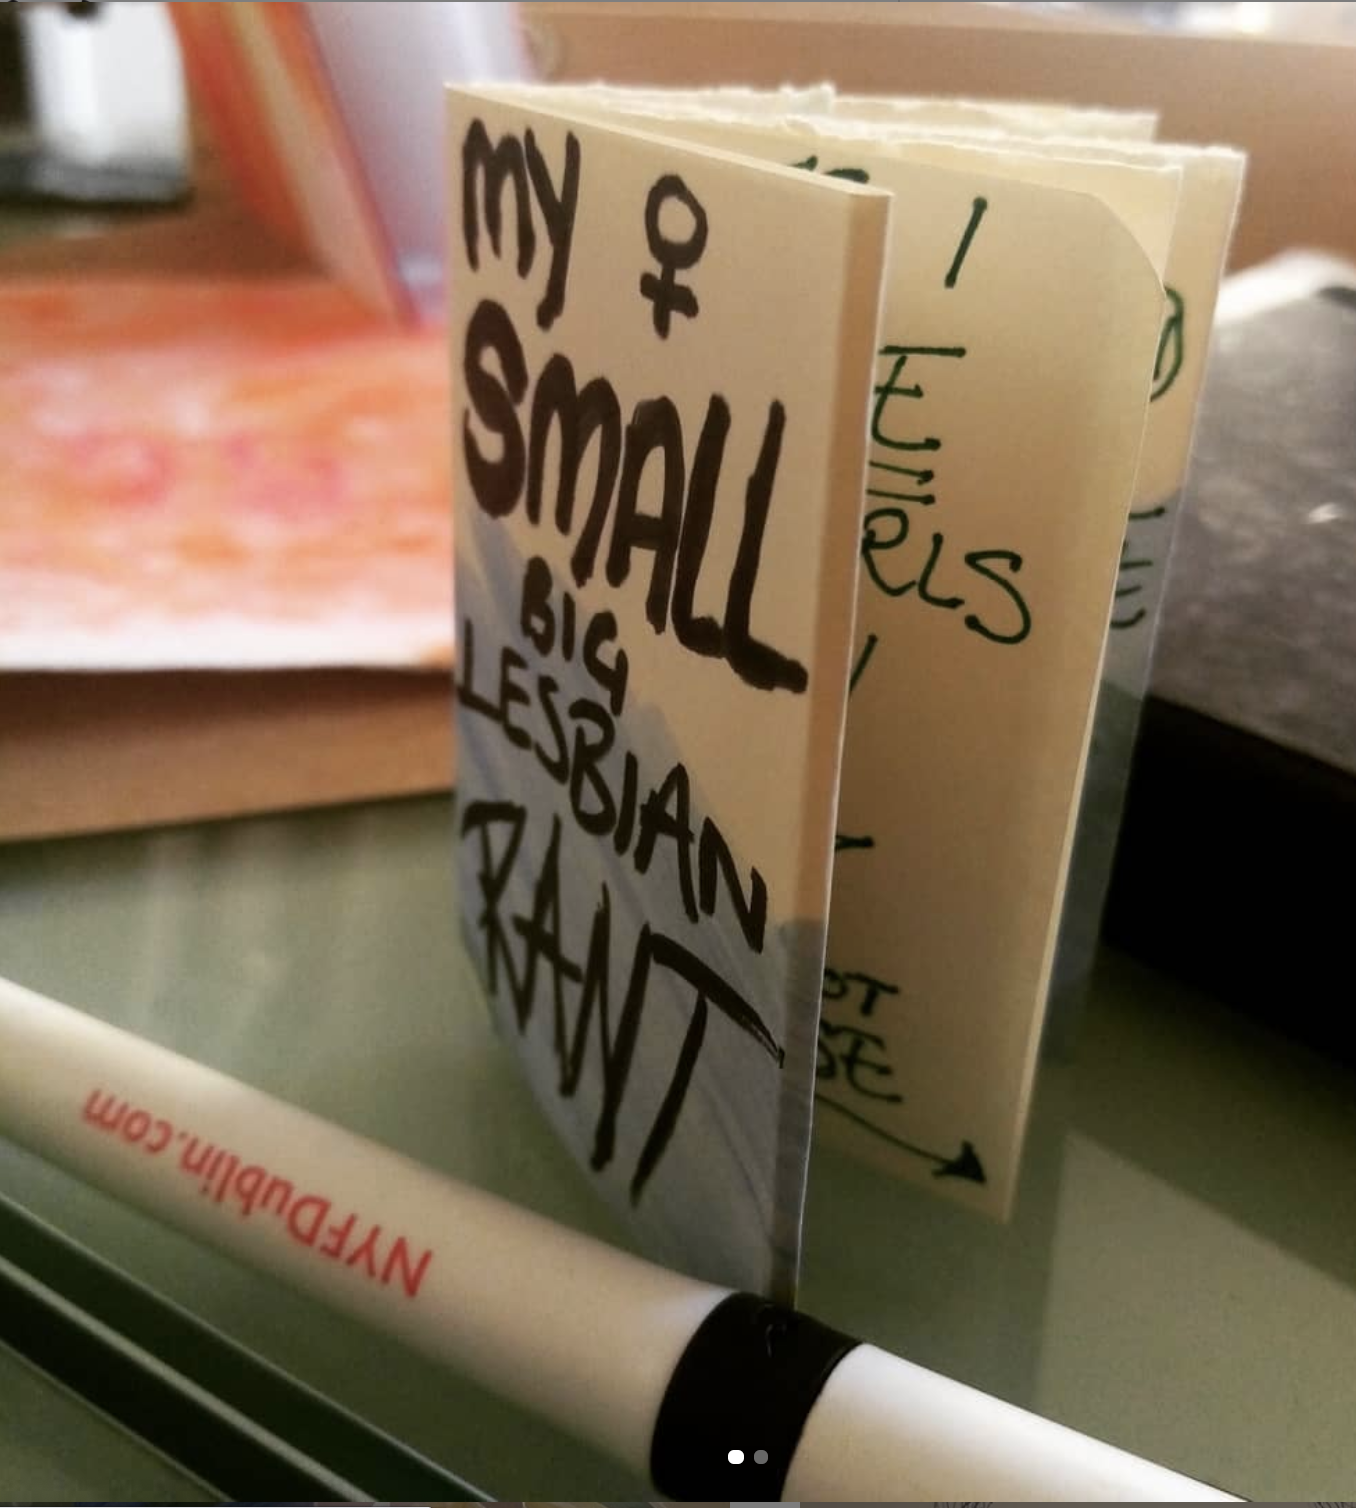 photo of My Small Big Lesbian Rant zine, which is tiny (about 7cm tall), next to a pen for scale. 